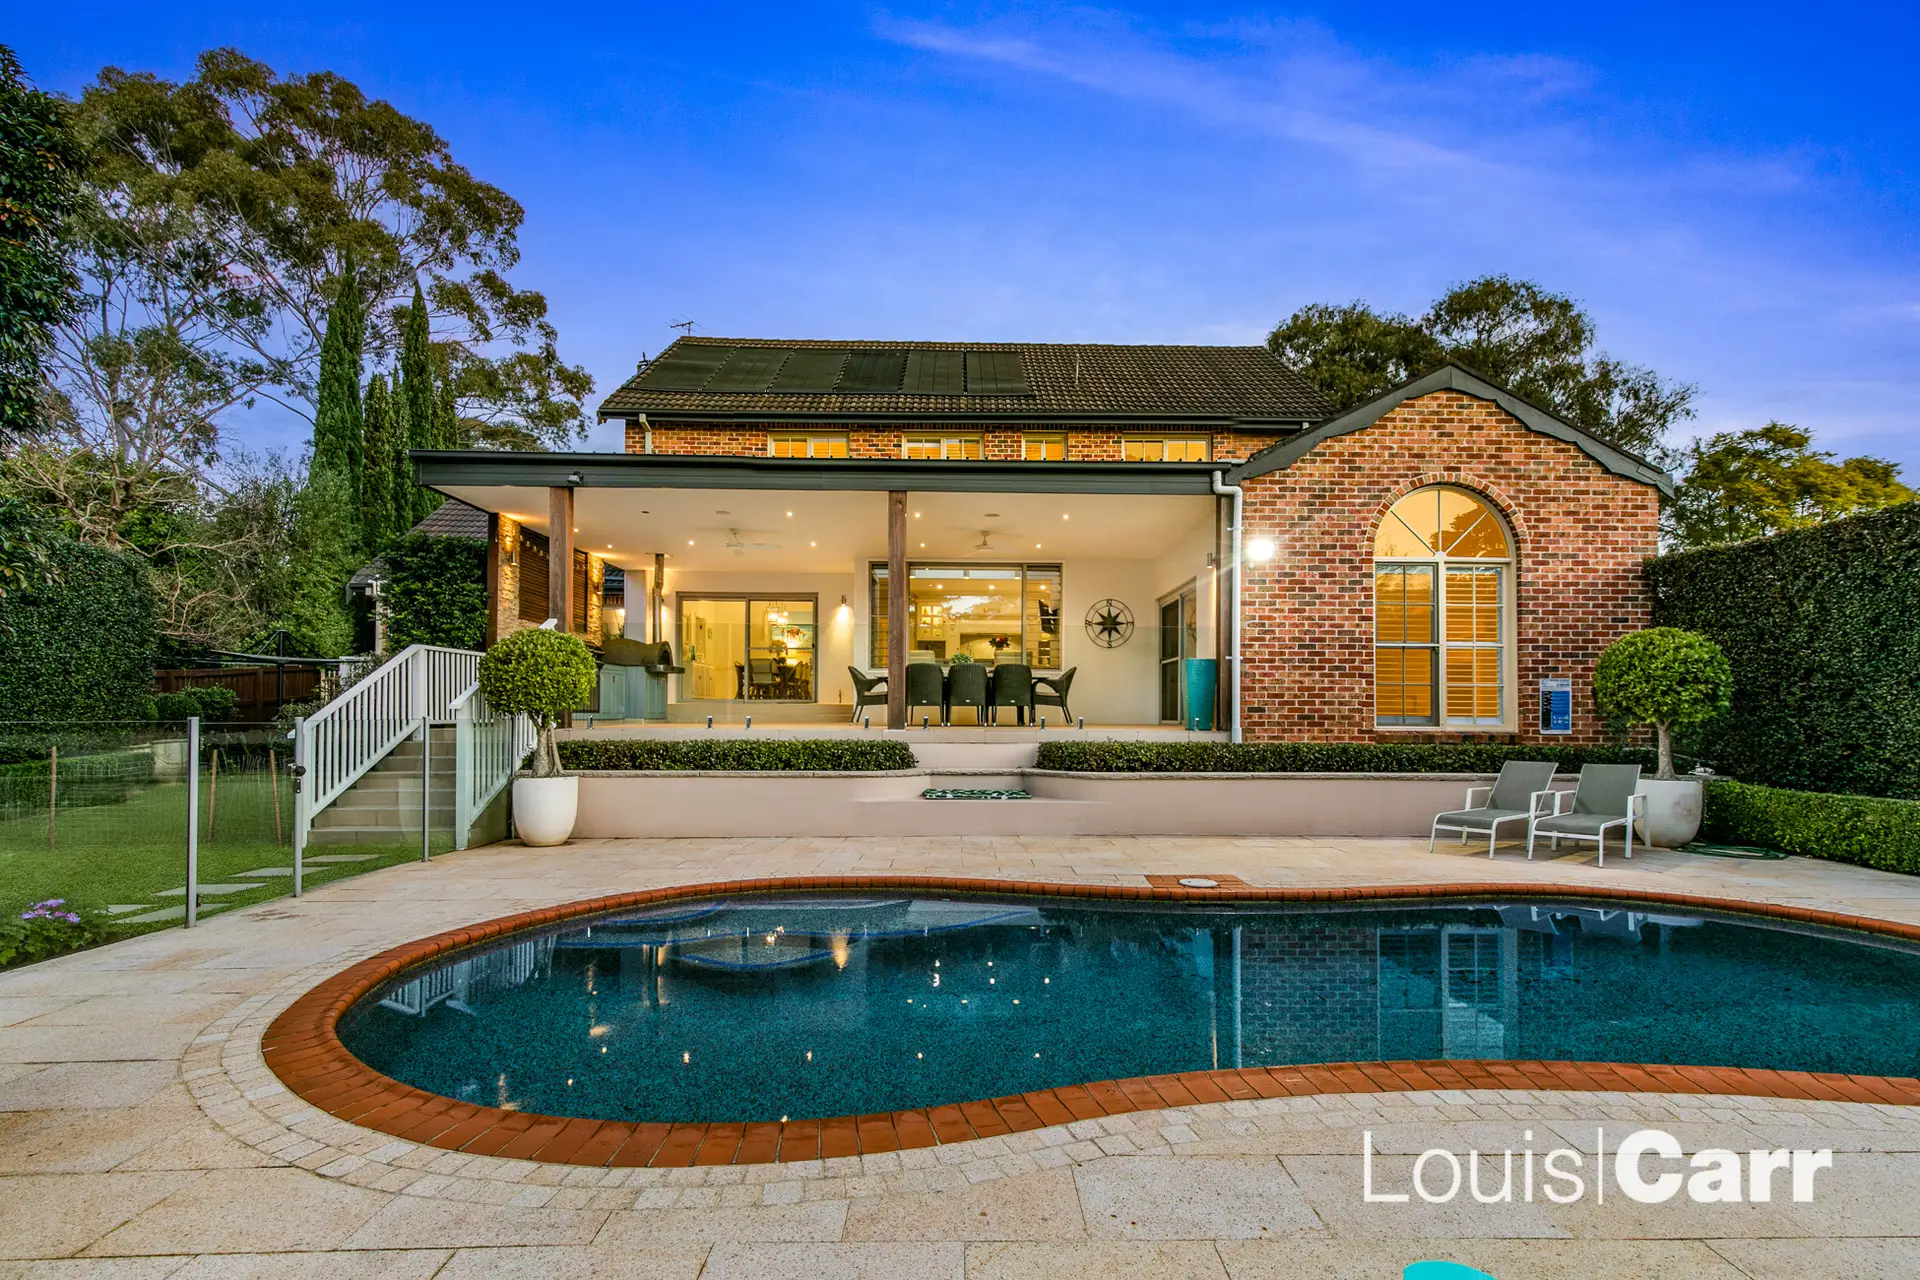 Photo #3: 16 Bellbird Drive, West Pennant Hills - Sold by Louis Carr Real Estate